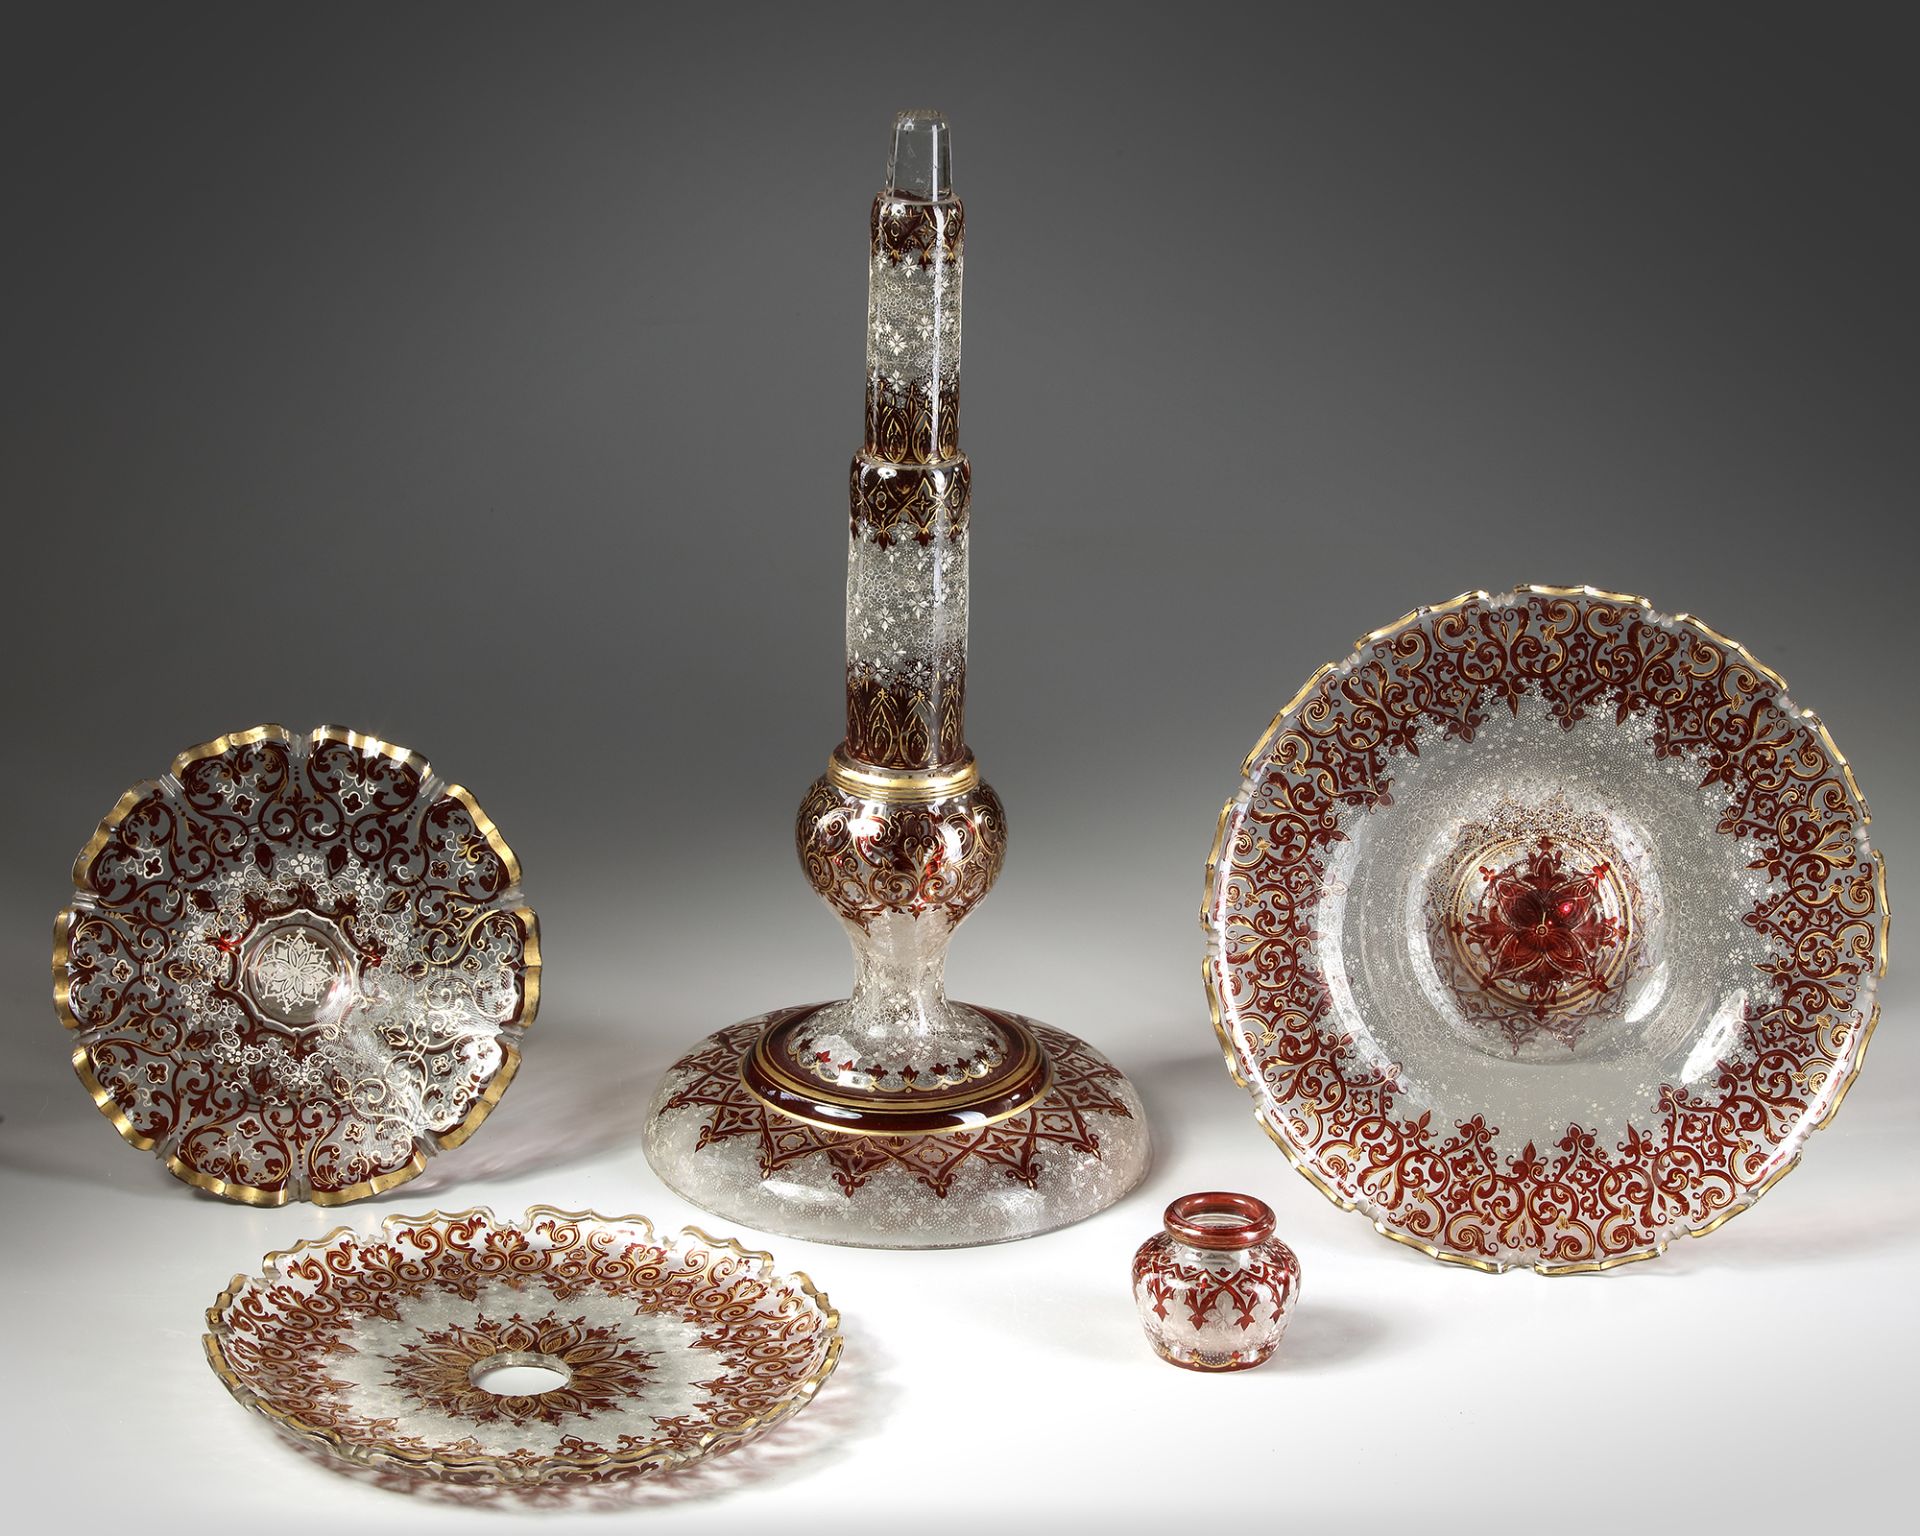 A BOHEMIAN CRYSTAL SET, LATE 19TH CENTURY - Image 3 of 3